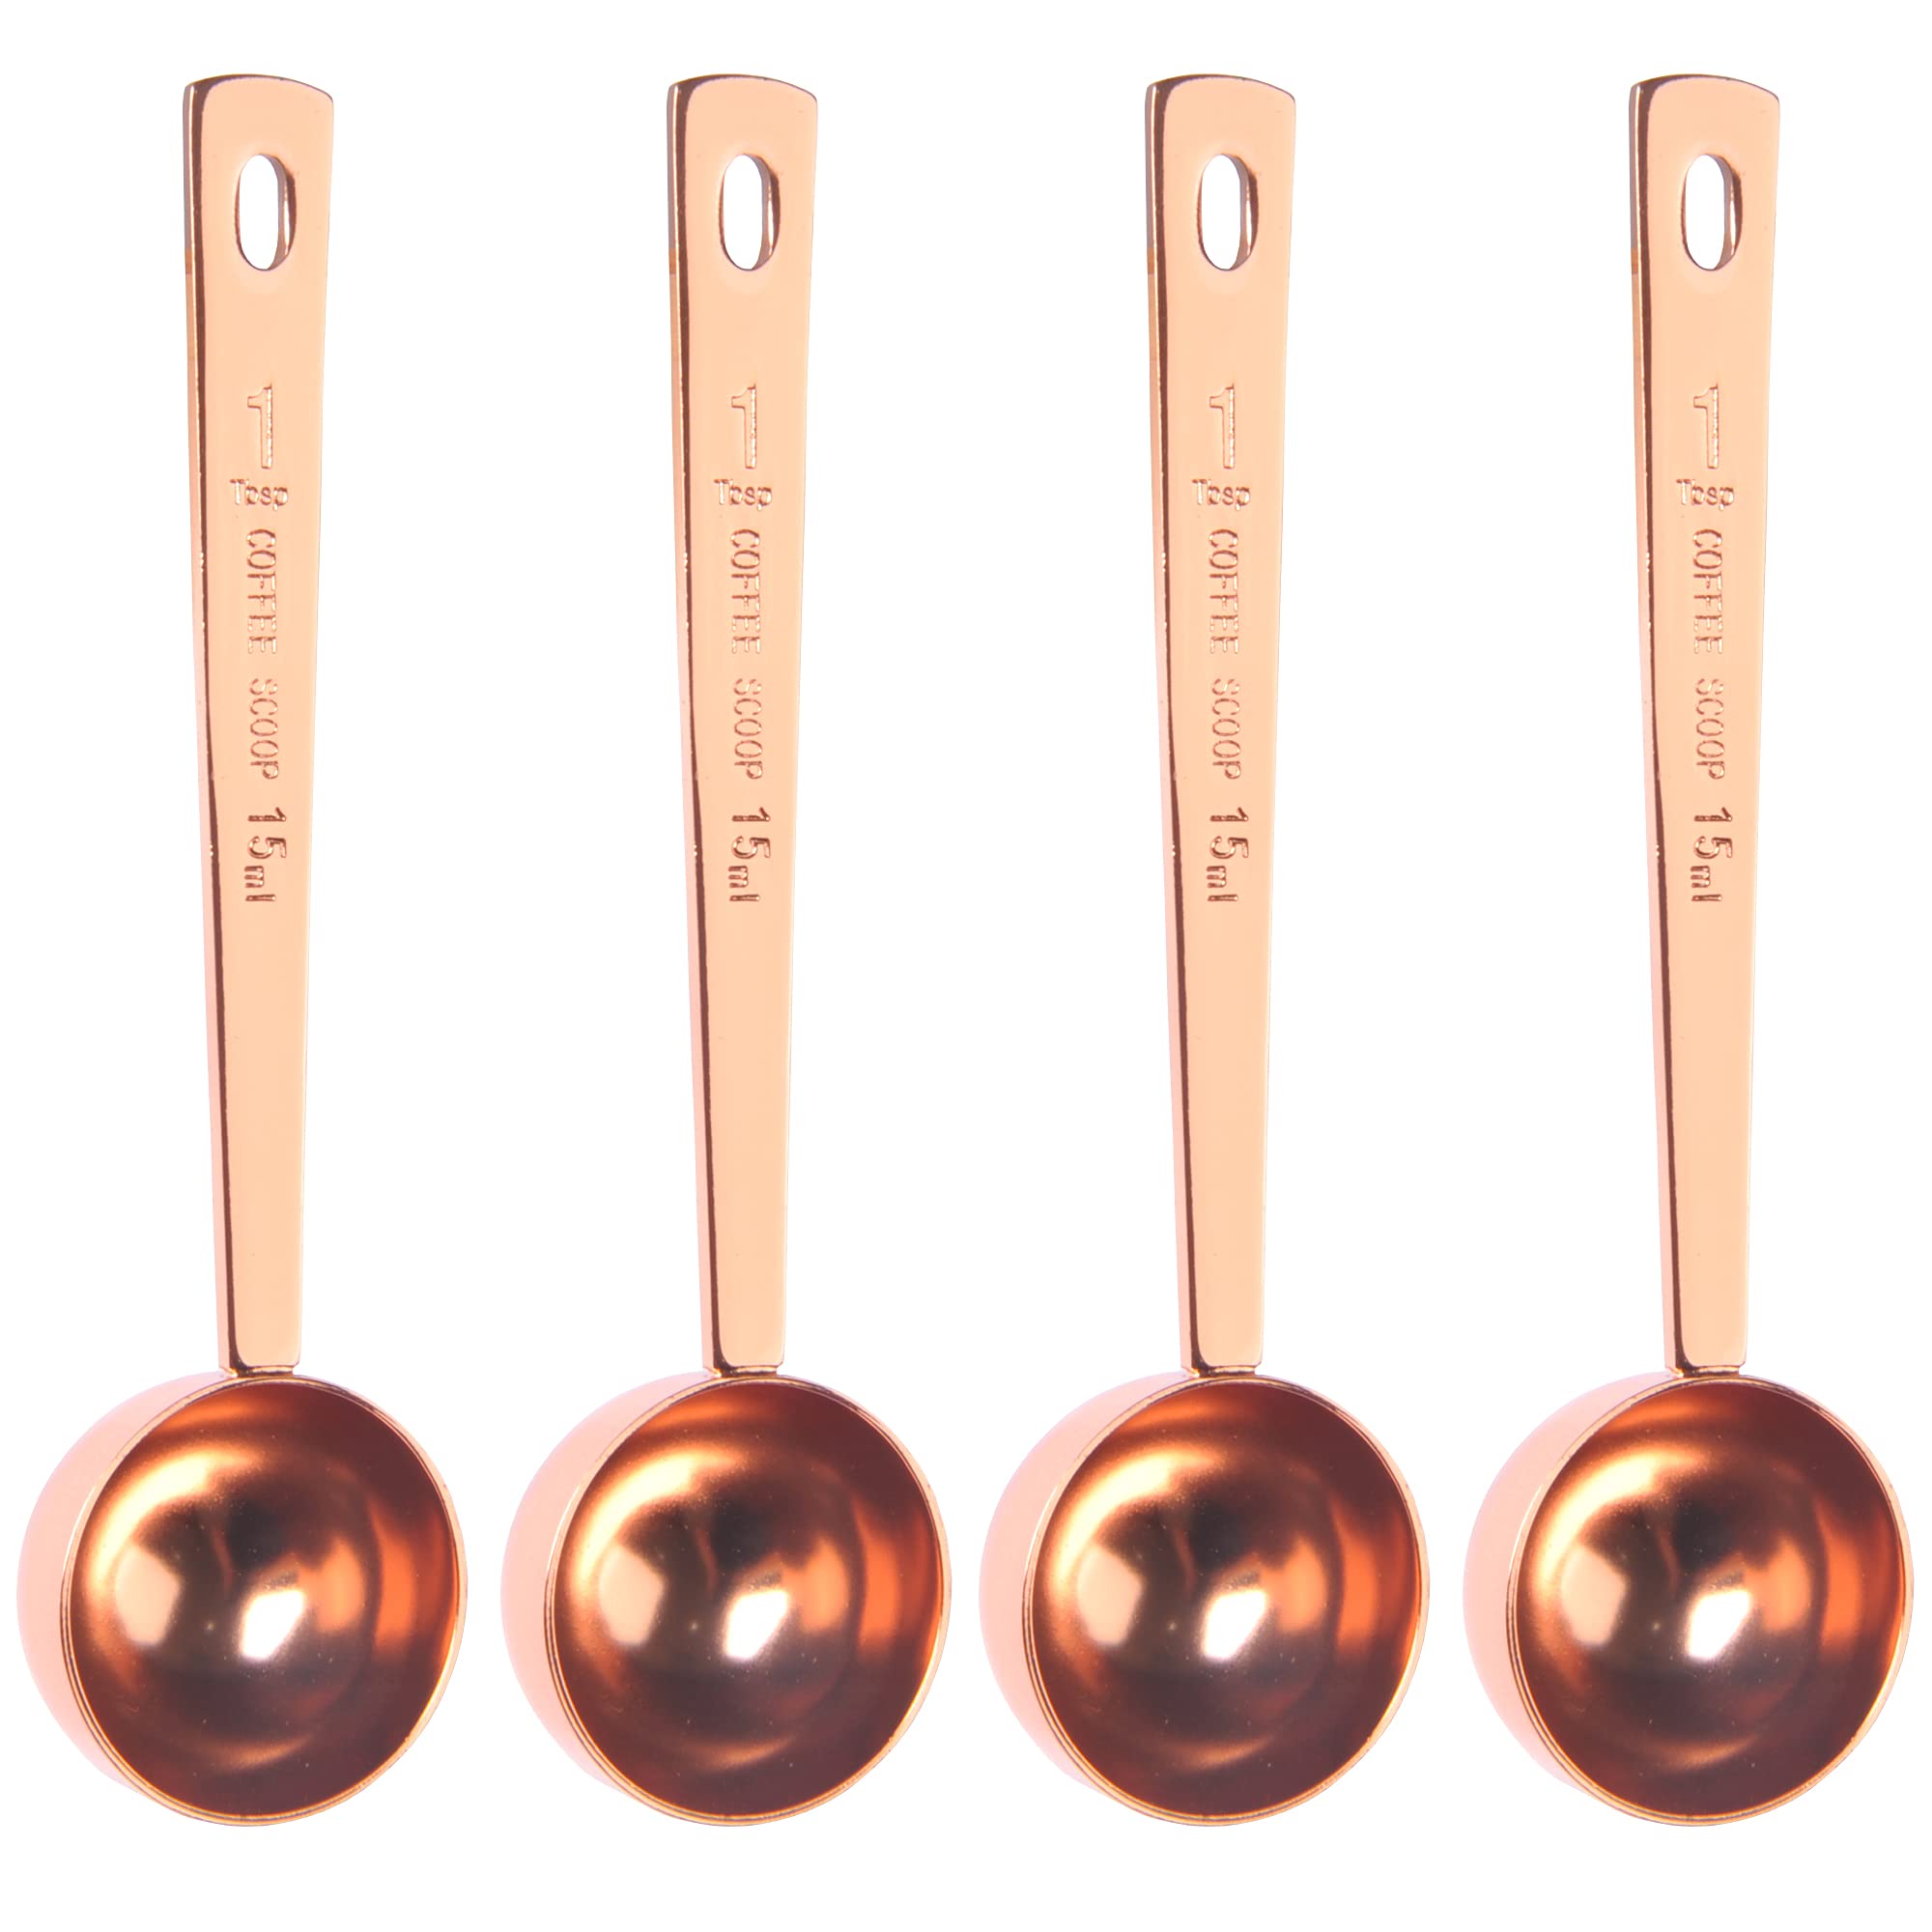 

Spoons Yzurbu Coffee Measuring Scoop Stainless Steel 1 Tablespoon Spoon Rose Gold amNqv